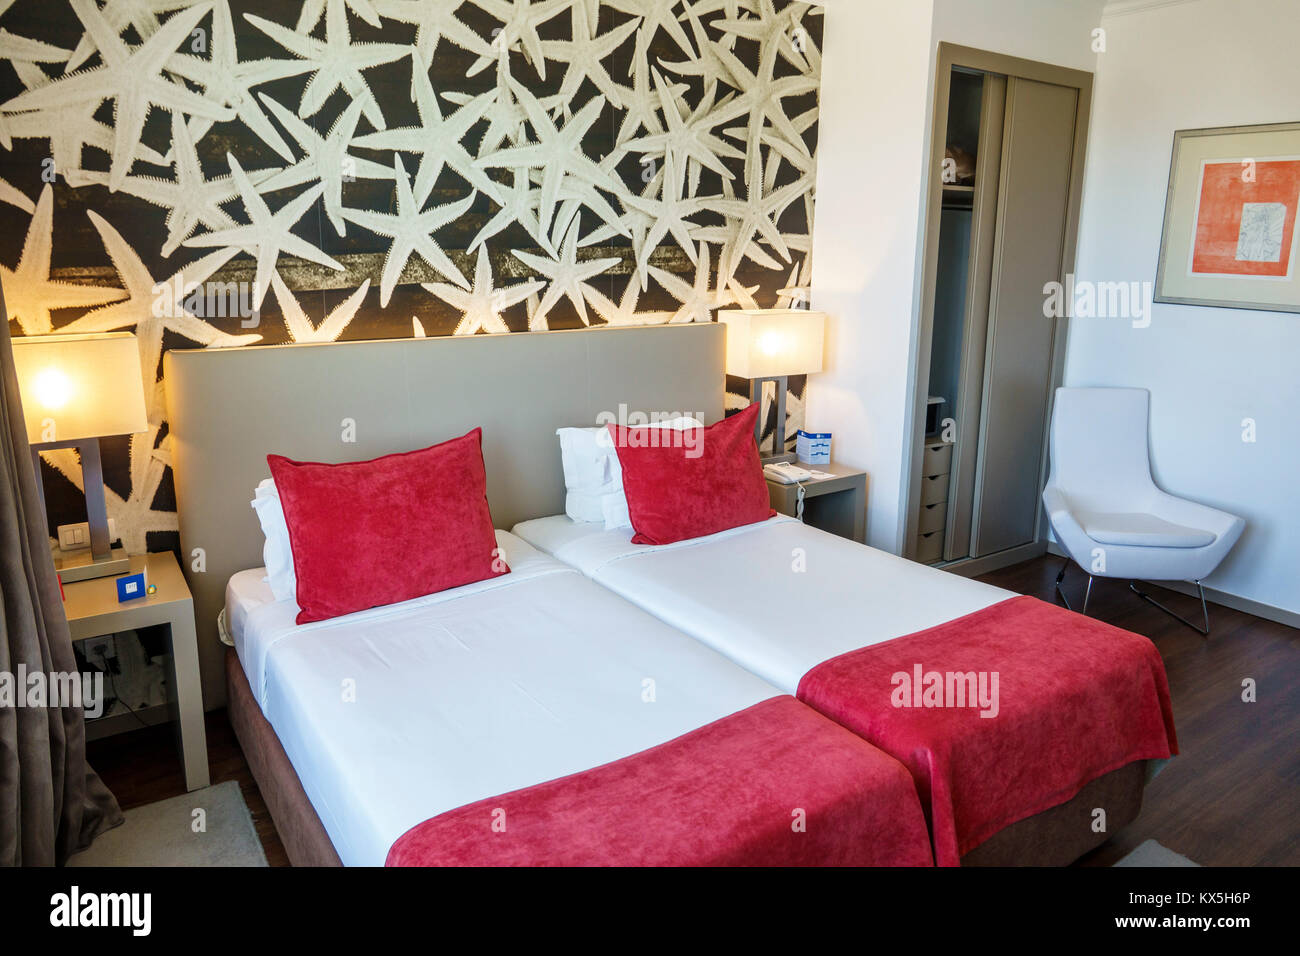 Lisbon Portugal,Oriente,TRYP Lisboa Oriente Hotel,guest room,bed,wall mural,Hispanic,immigrant immigrants,Portuguese,PT170712119 Stock Photo